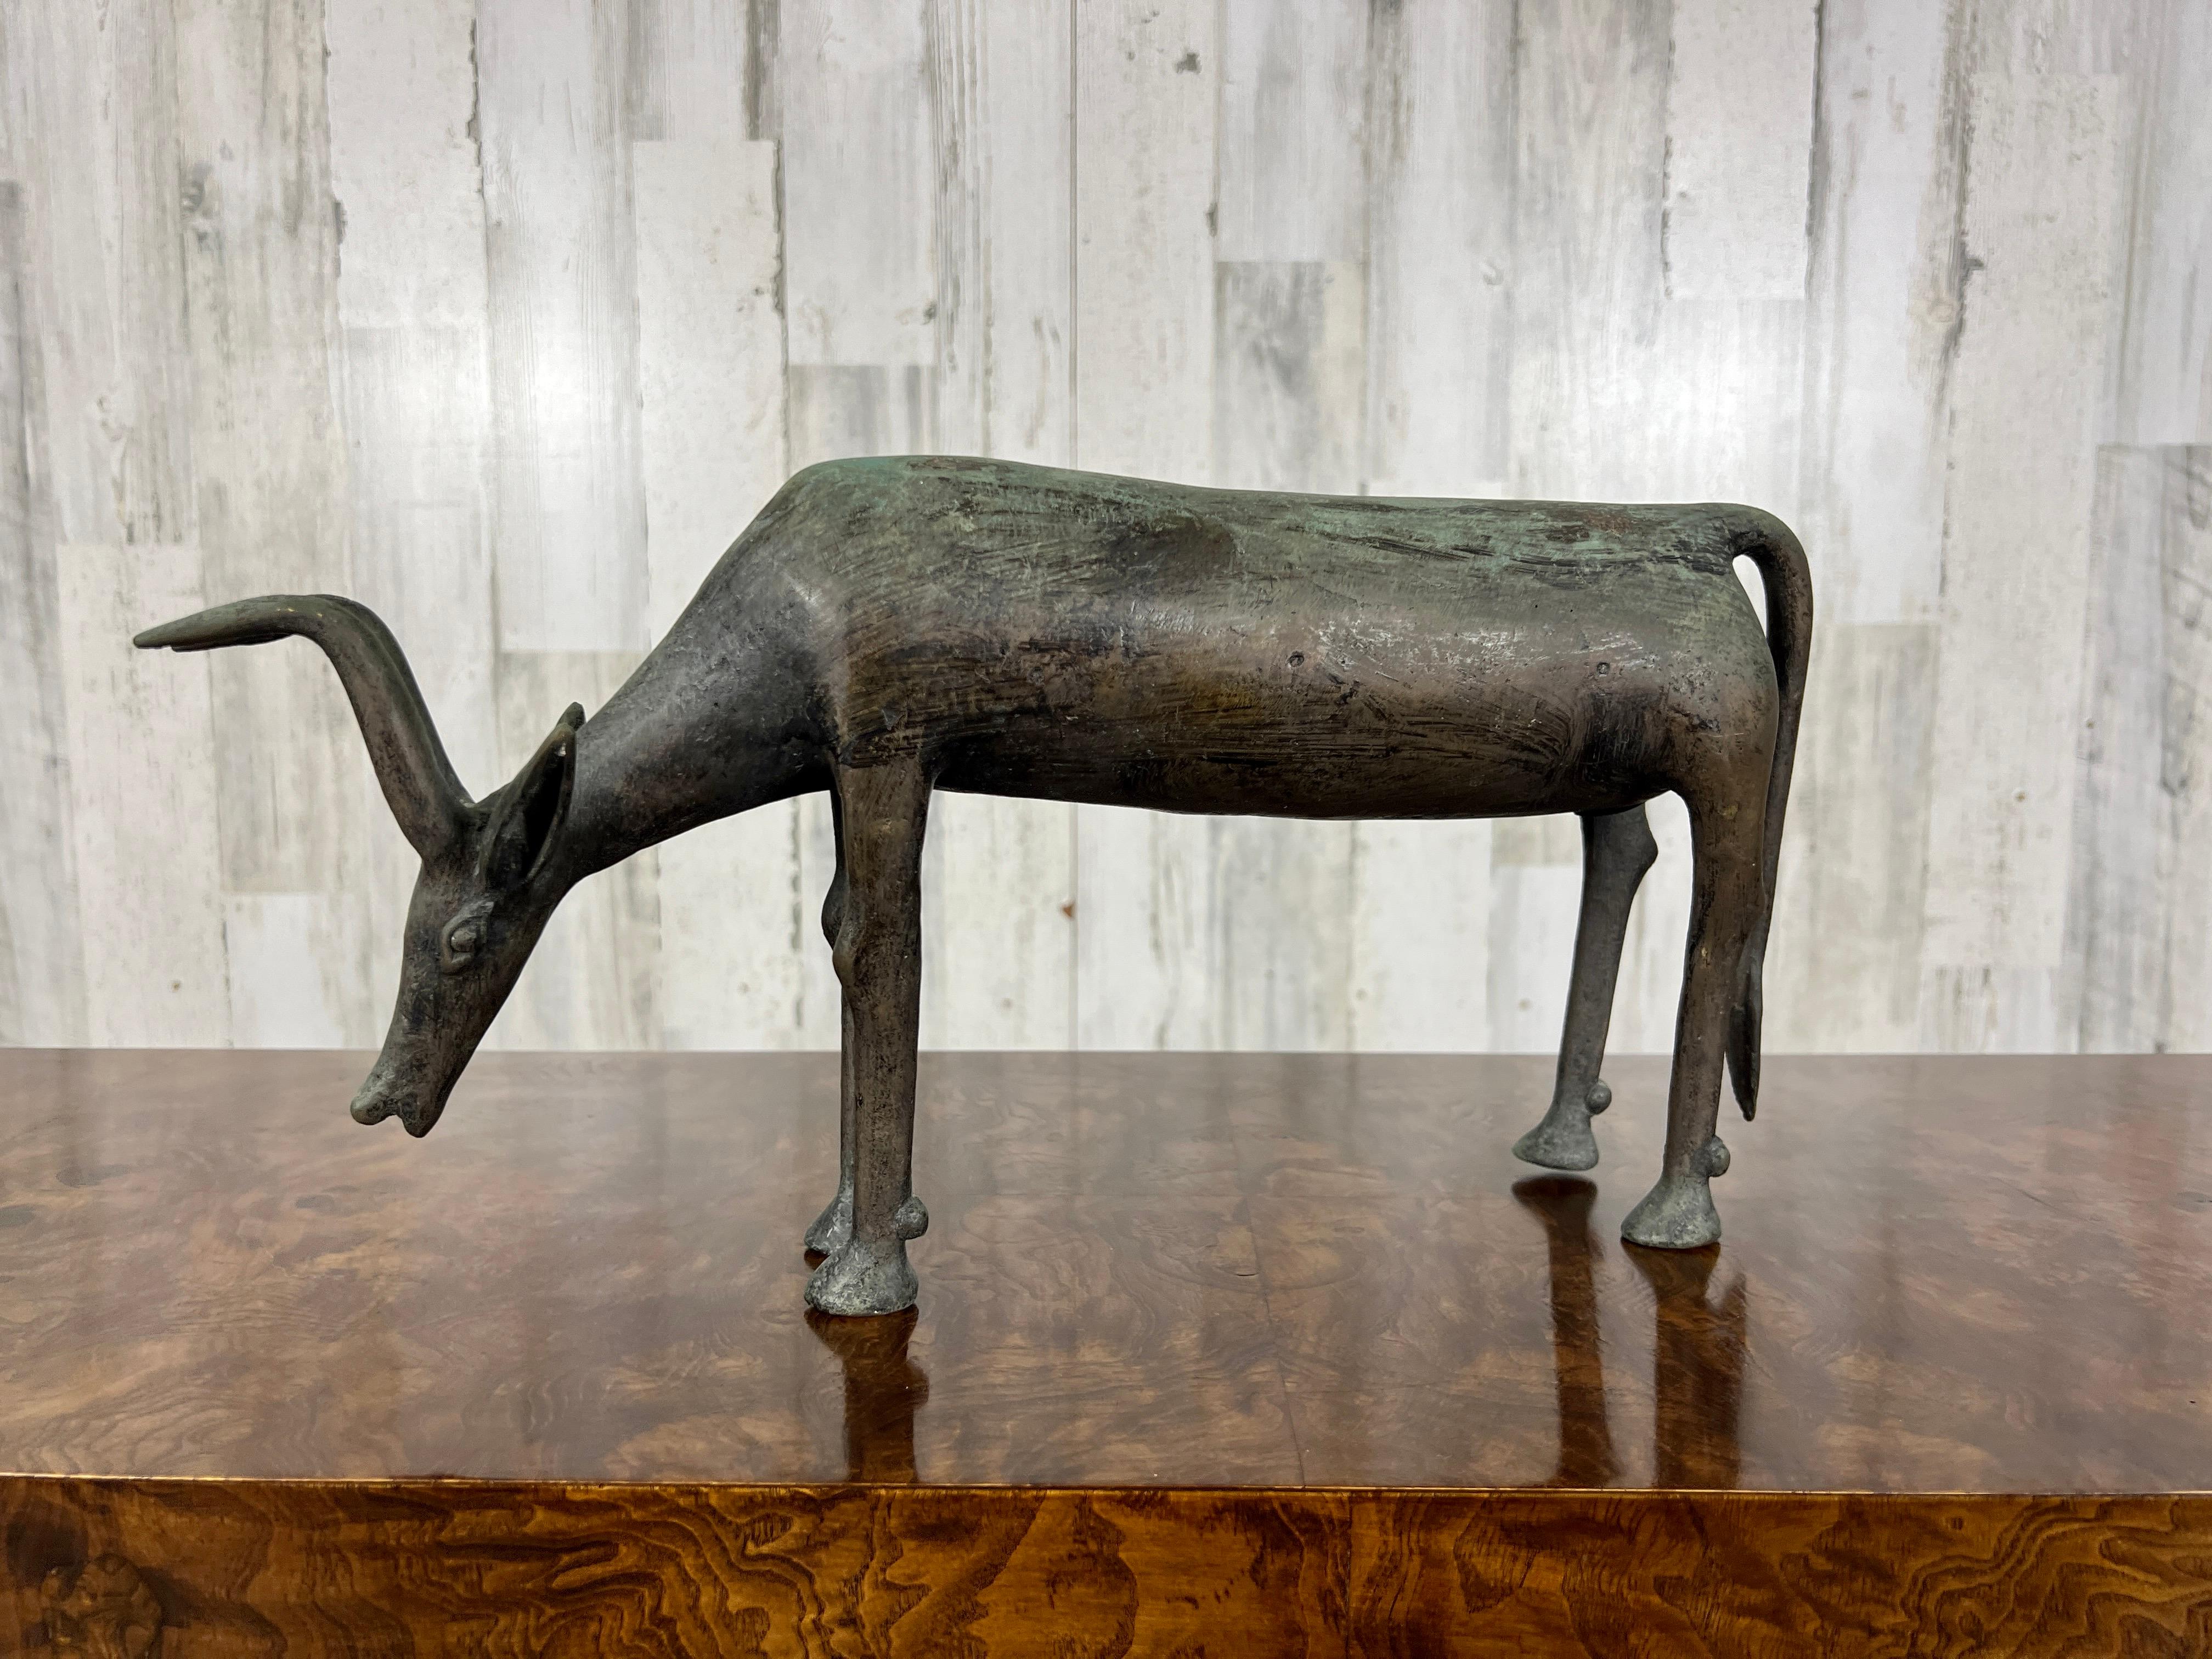 Beautiful African bronze Antelope bending its neck down to drink, in the style of the Ashanti. Great texture and detail!